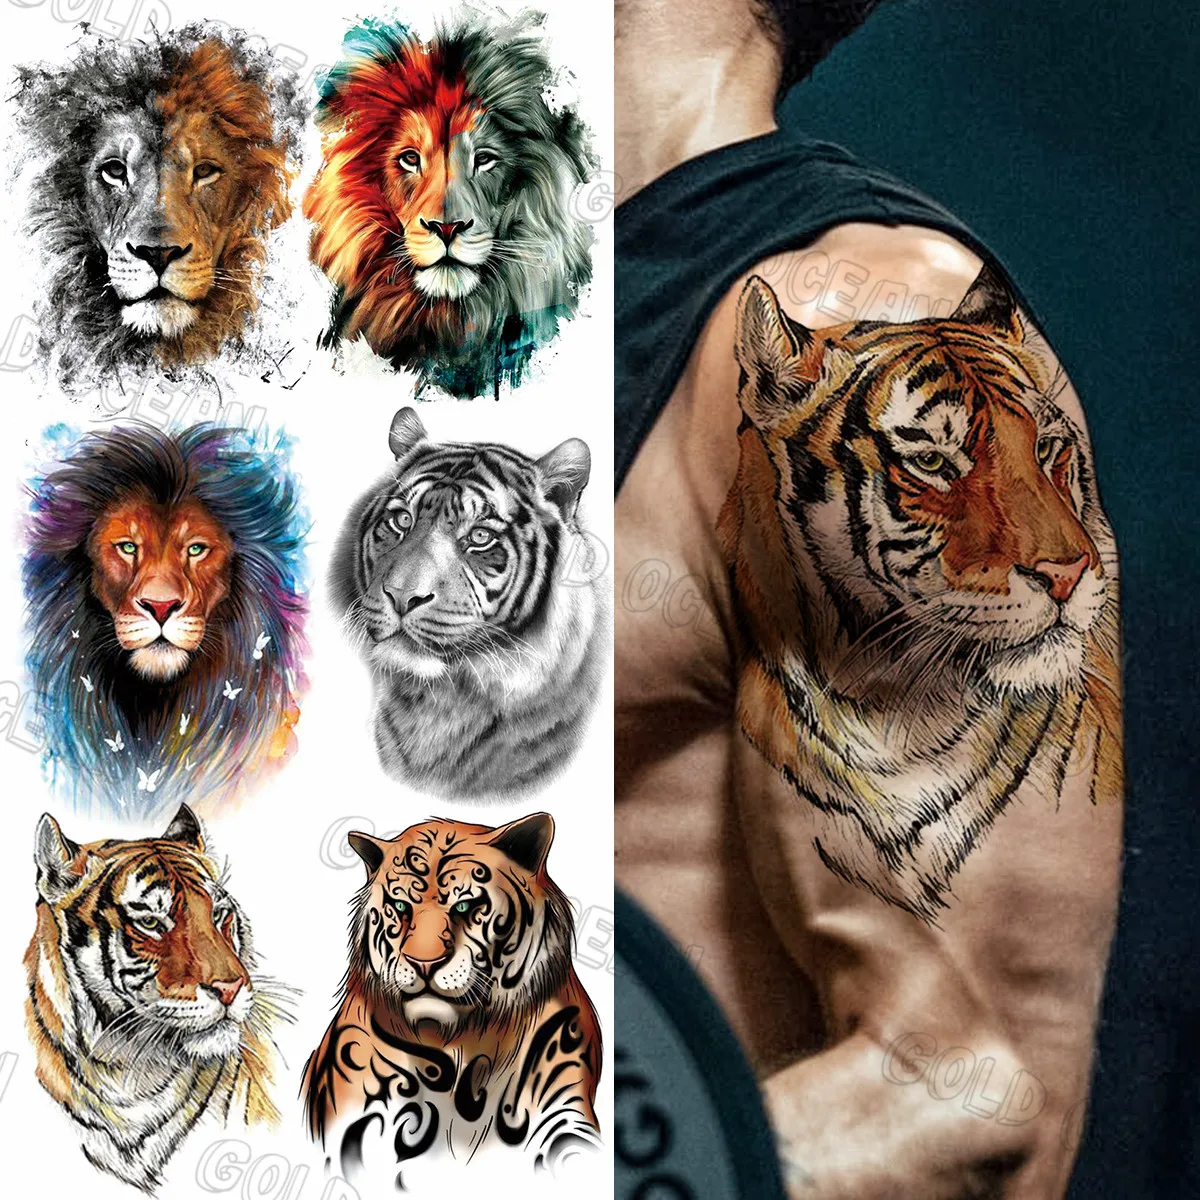 

Watercolor Half Sleeve Realistic Tiger Temporary Tattoos For Men Adults Women 3D Lion Black Tiger Fake Tattoo Sticker Arm Thigh